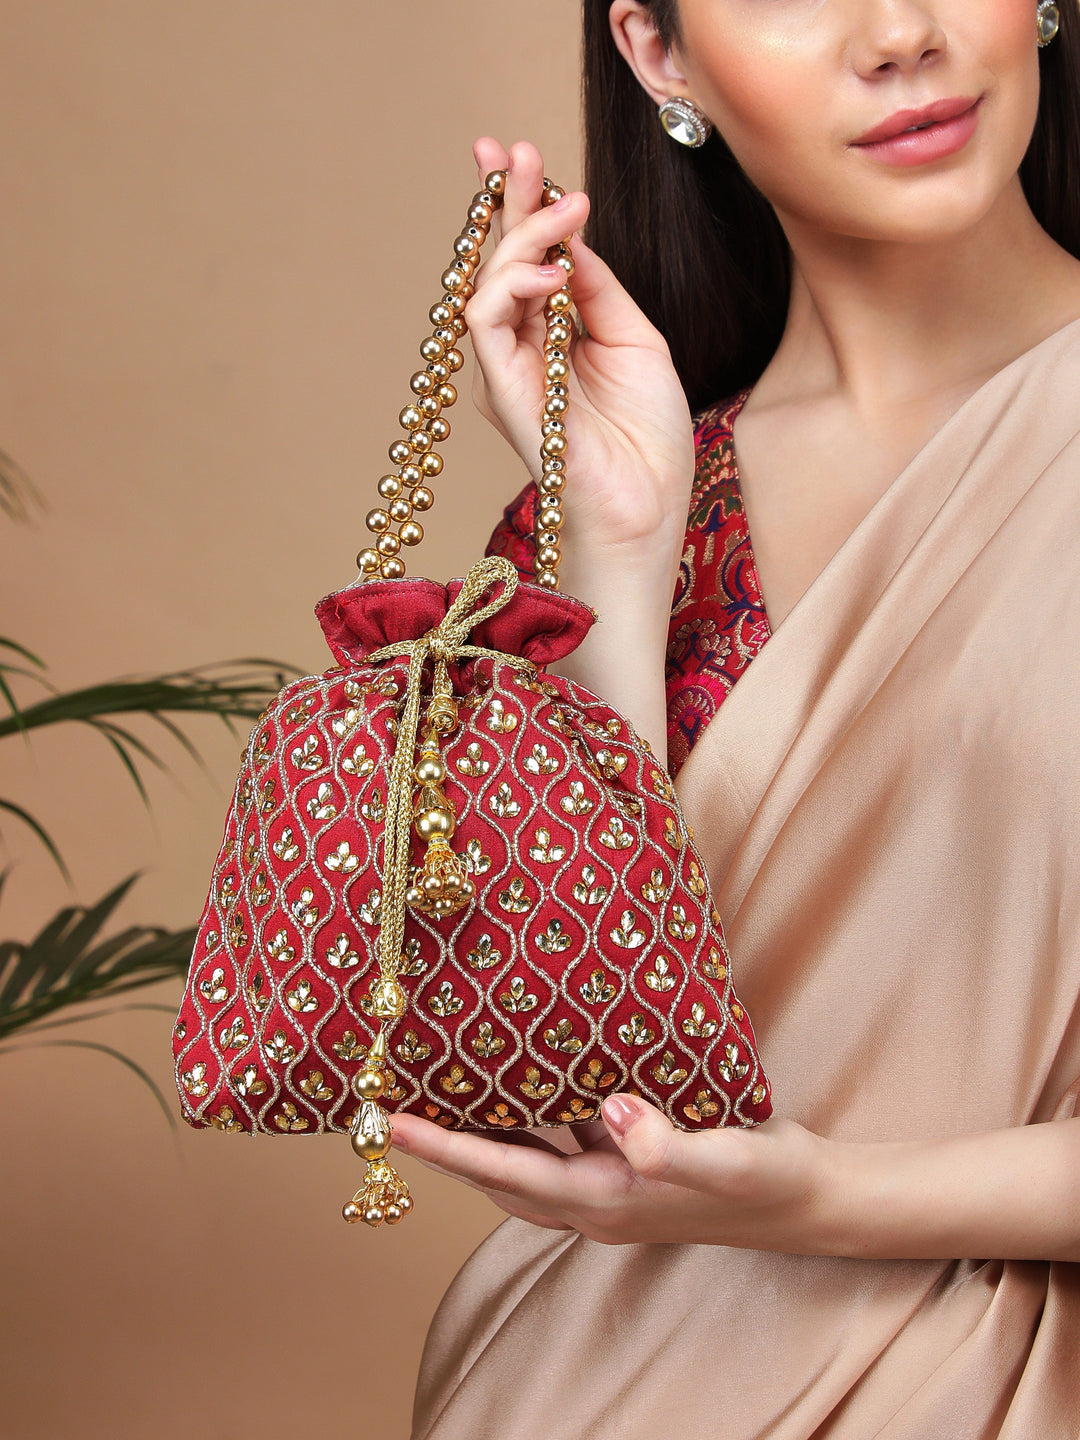 Rubans Maroon Coloured Potli Bag With Golden And White Beads Design Handbag & Wallet Accessories